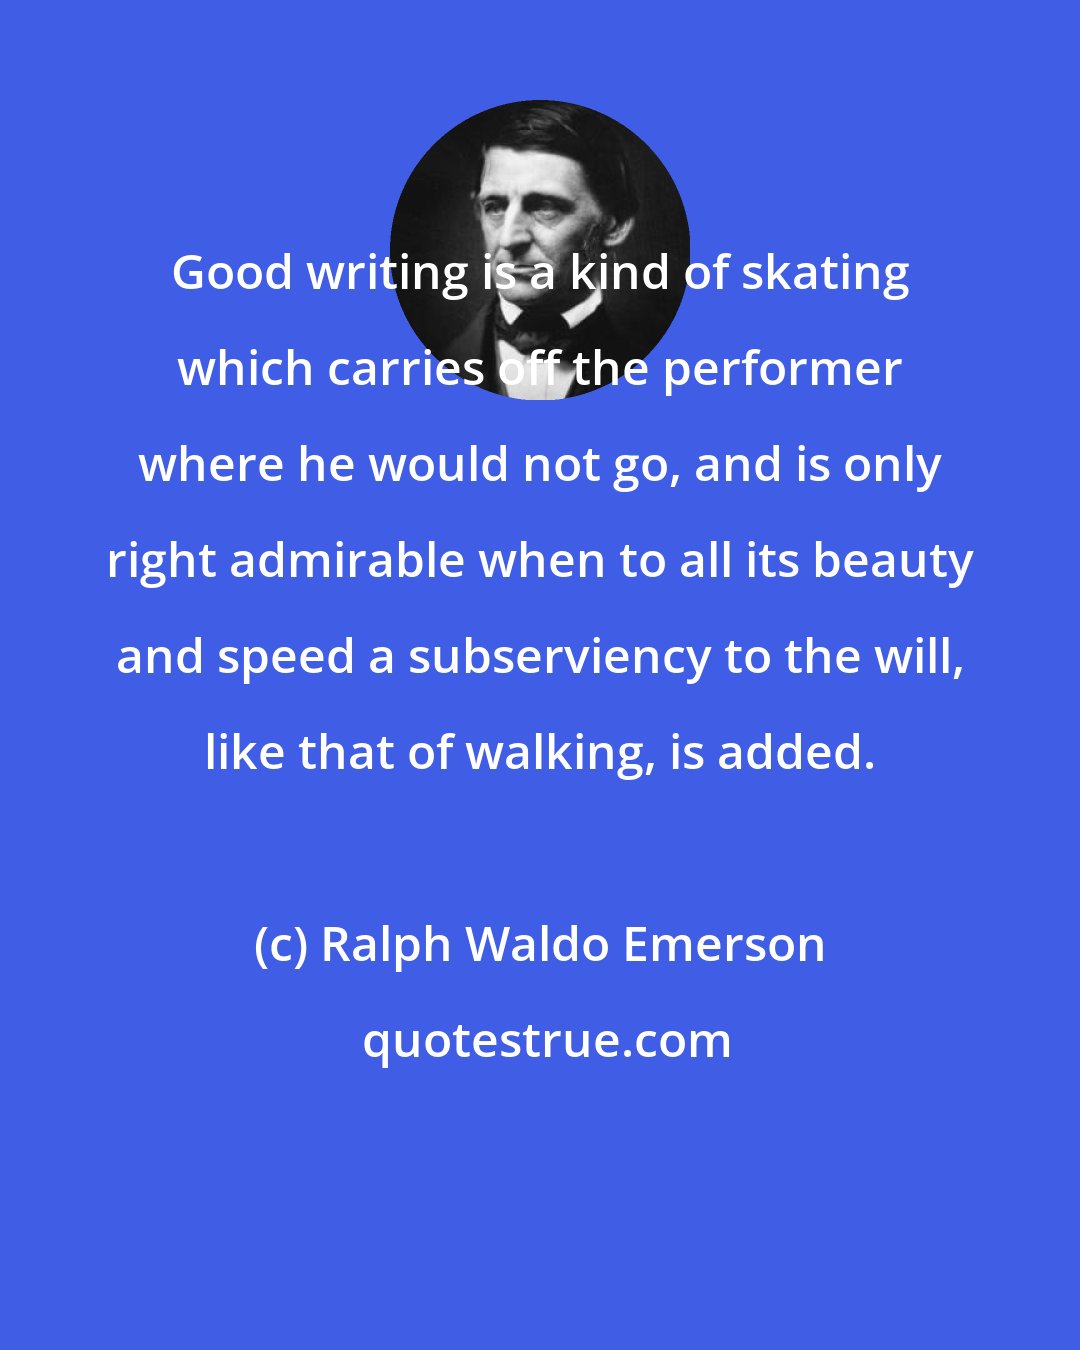 Ralph Waldo Emerson: Good writing is a kind of skating which carries off the performer where he would not go, and is only right admirable when to all its beauty and speed a subserviency to the will, like that of walking, is added.